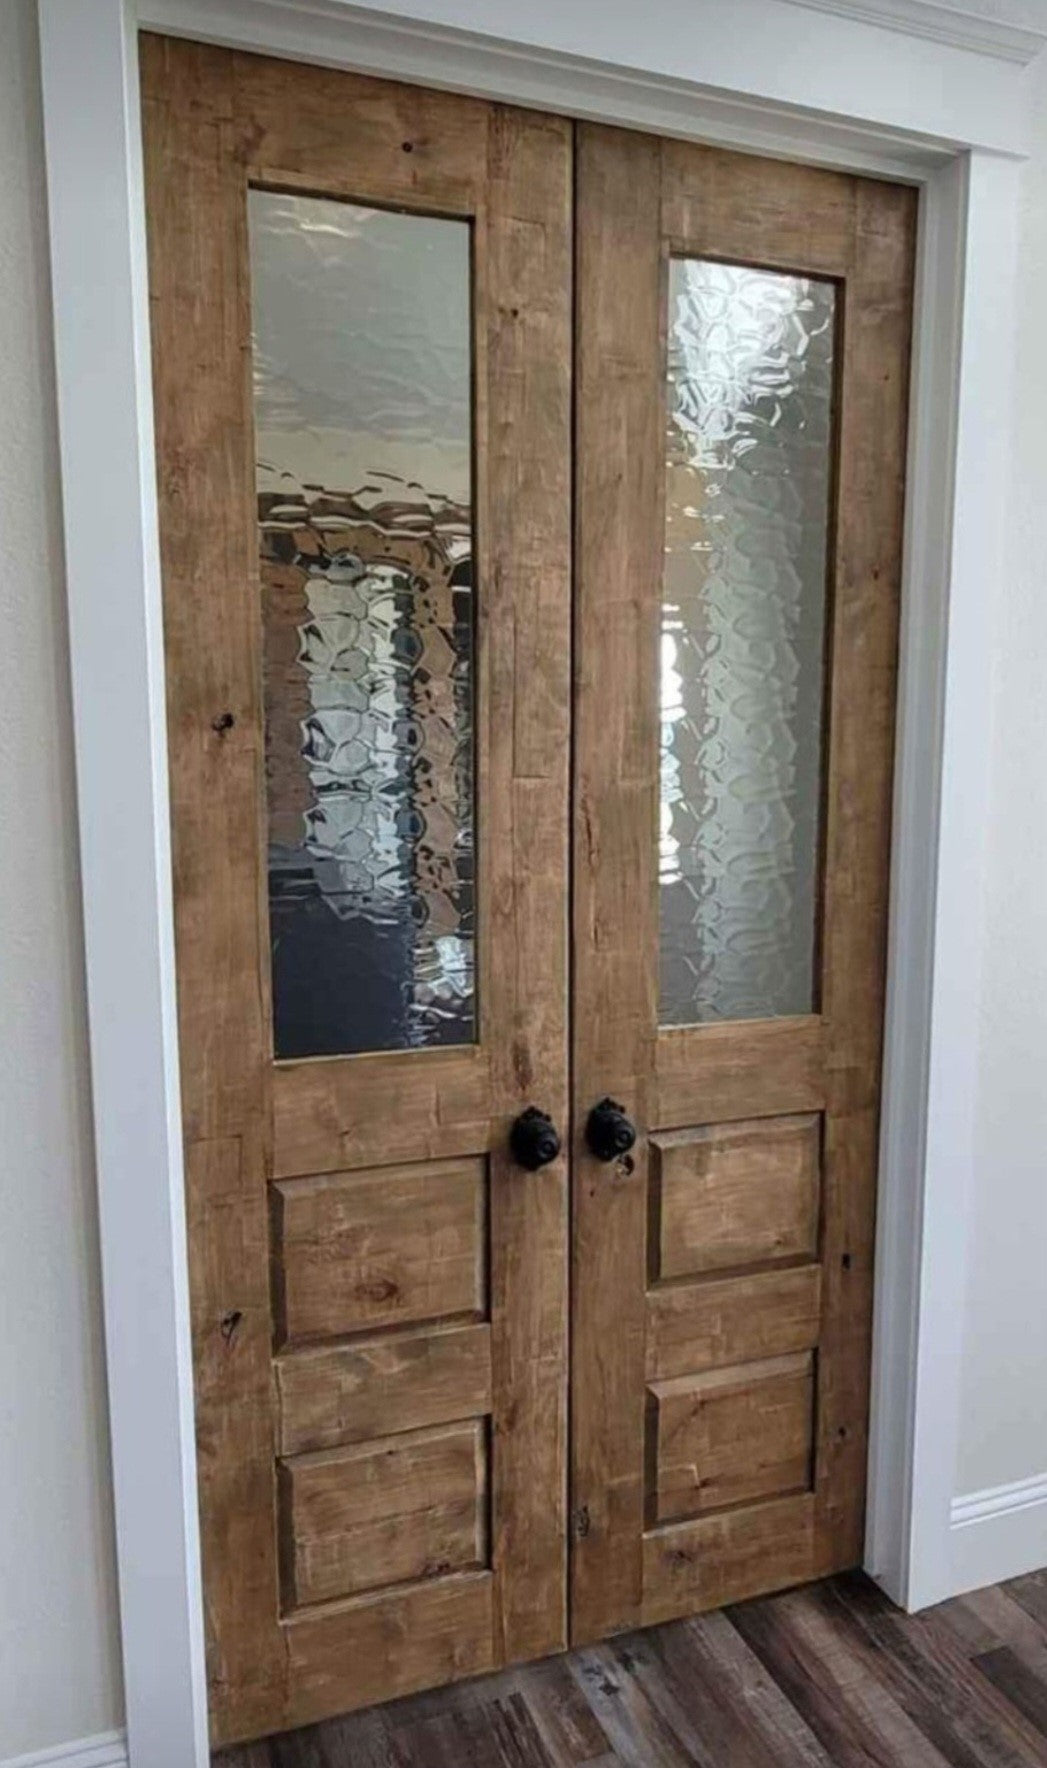 Custom Built: Traditional Double Panel French Doors Pre Hung    (Glass French Doors, Sliding Barn Door, Pocket Door, Pantry Doors, Antique Doors, Custom Interior Doors)